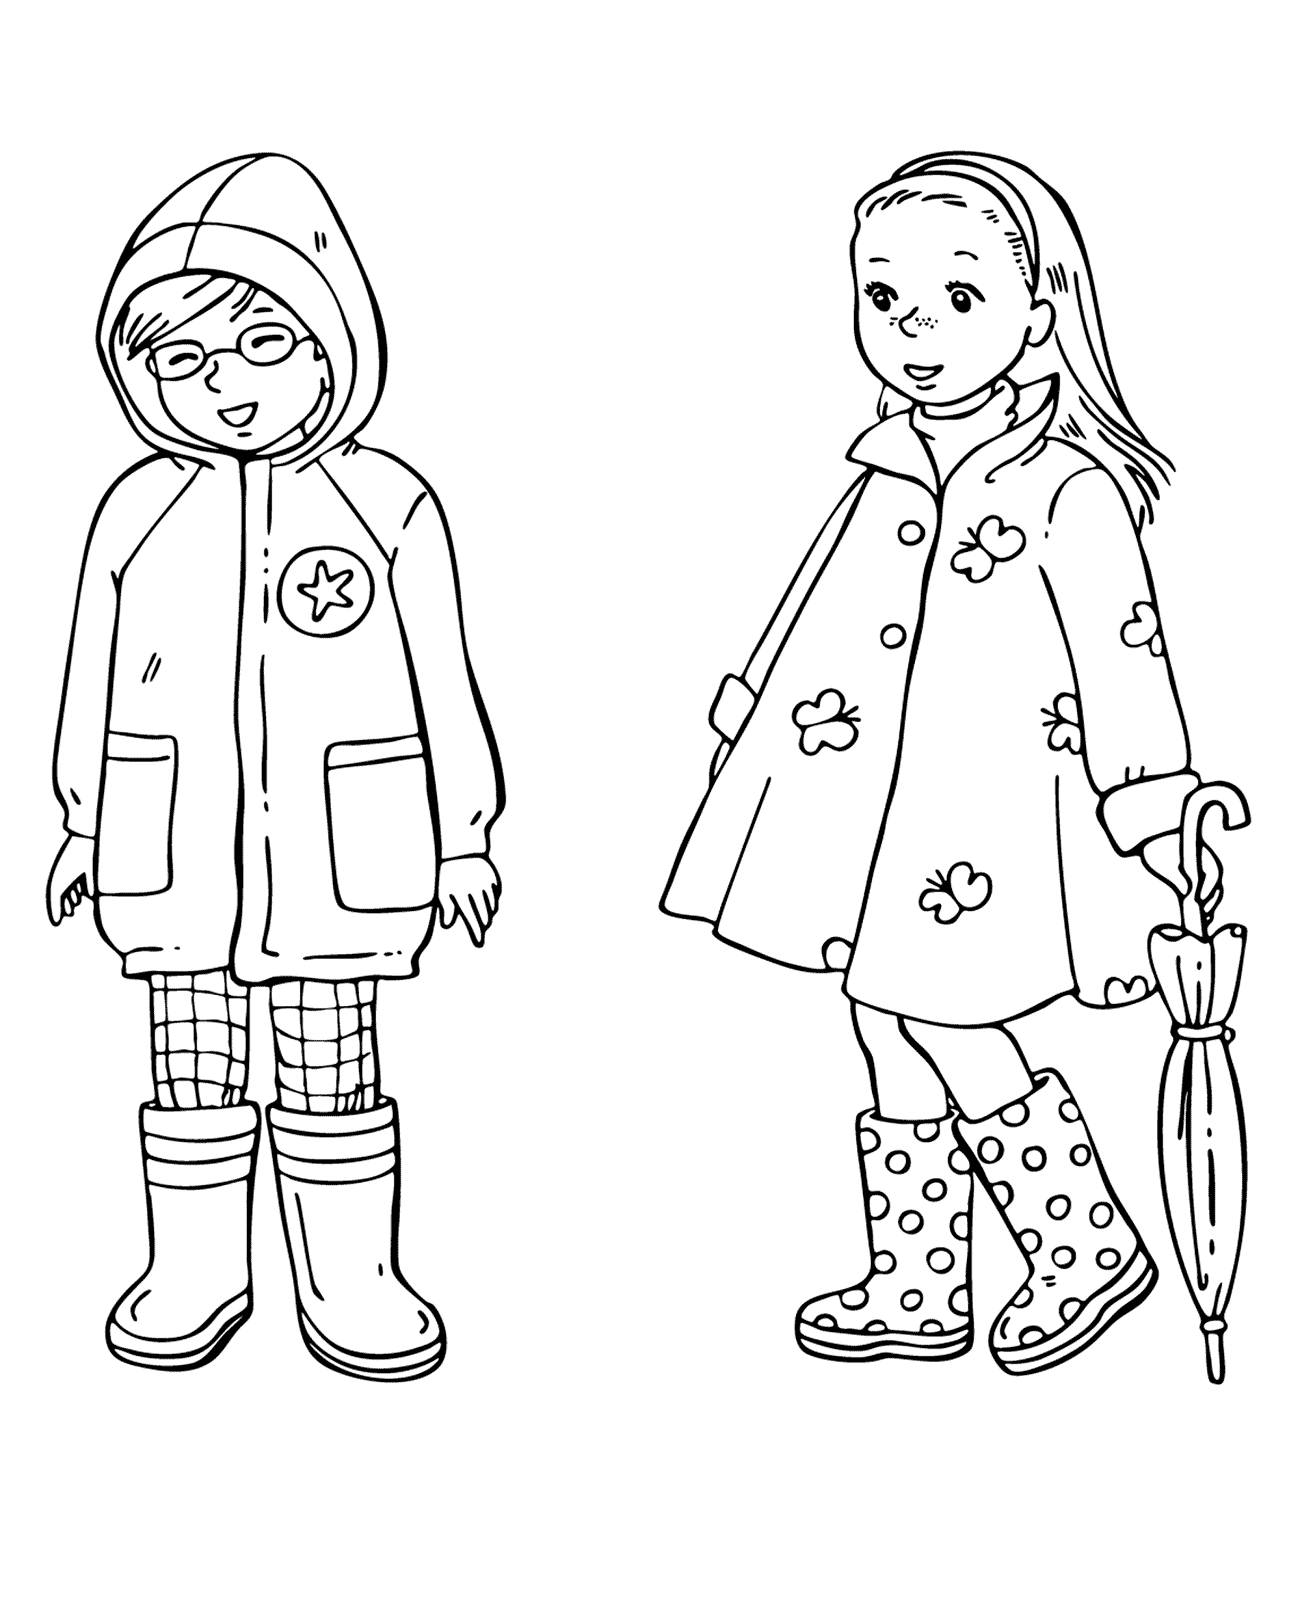 Coloring page girl and boy